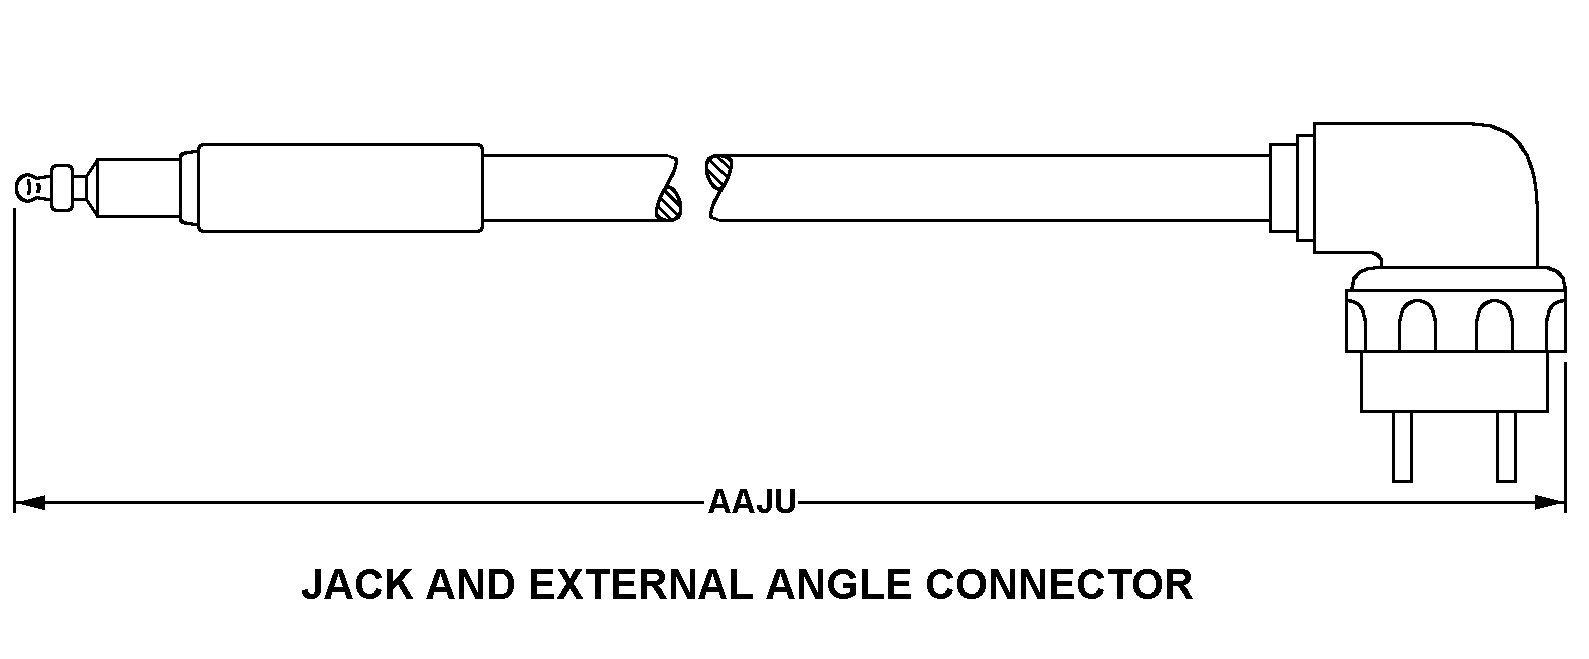 JACK AND EXTERNAL ANGLE CONNECTOR style nsn 5995-01-324-3898